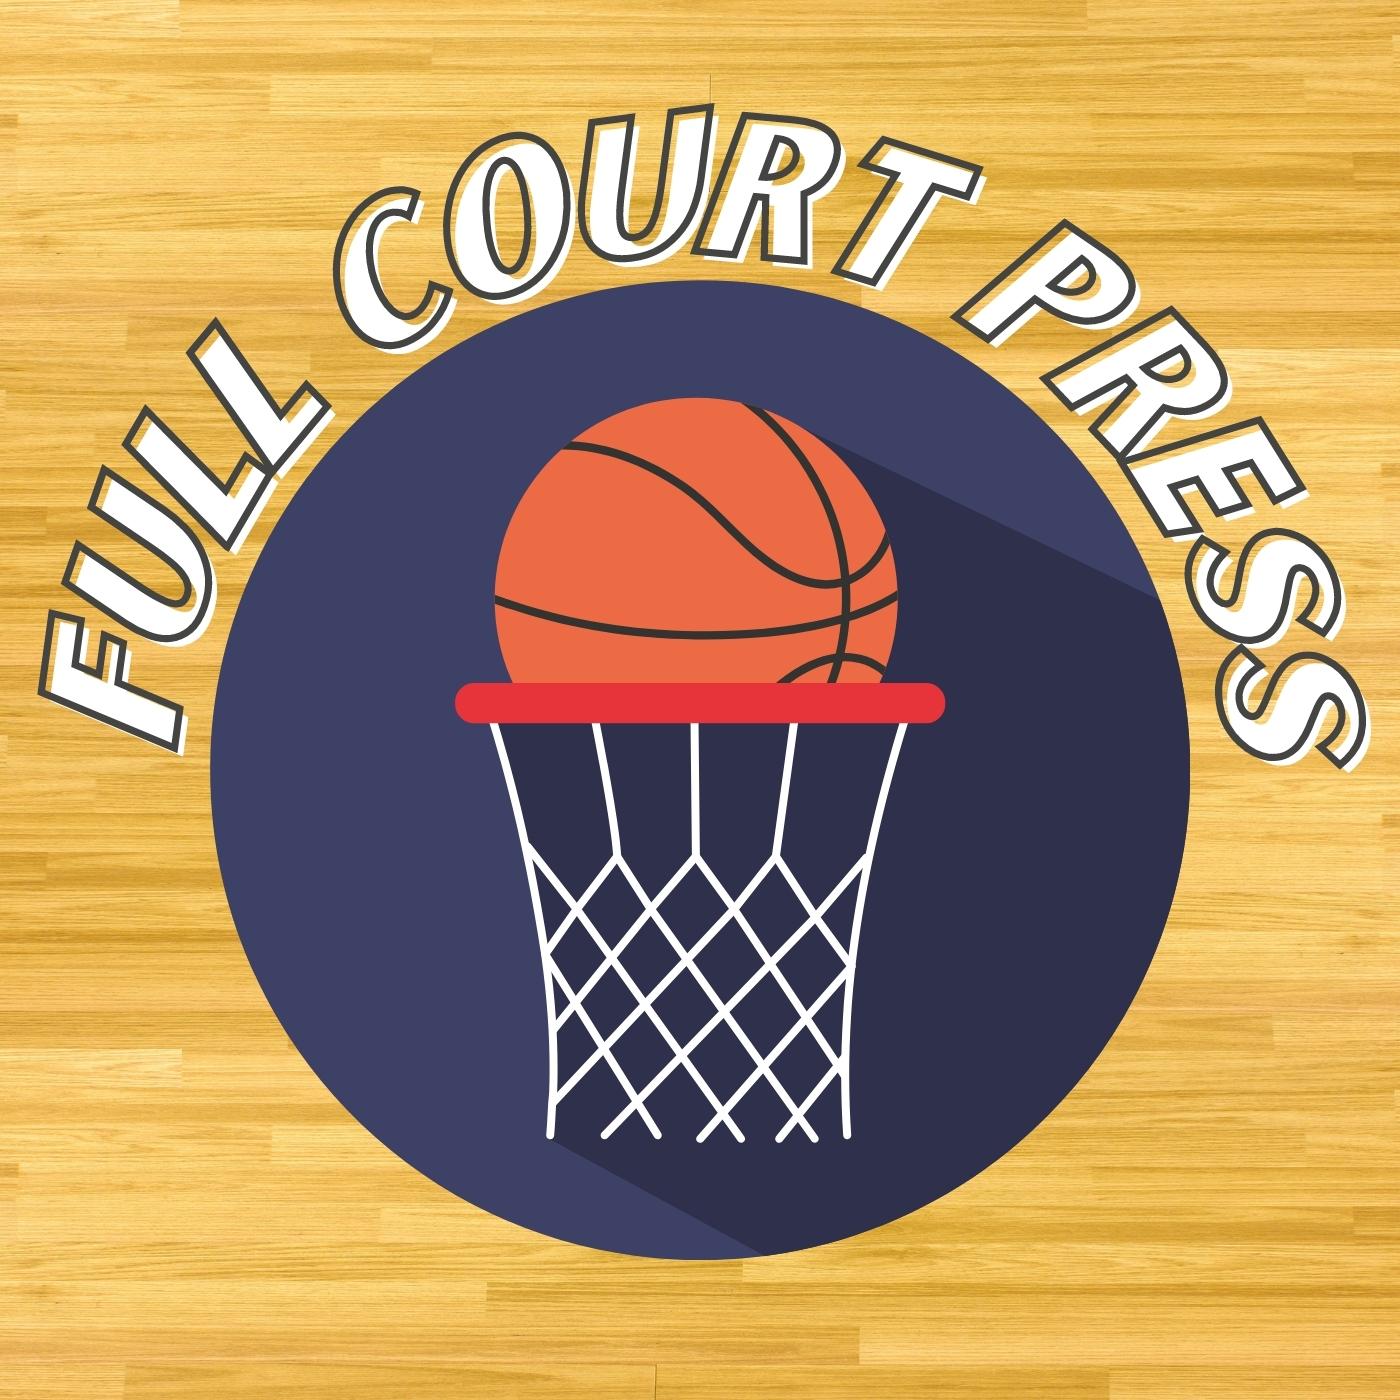 Full Court Press S02.E17 - Hoops Grid special